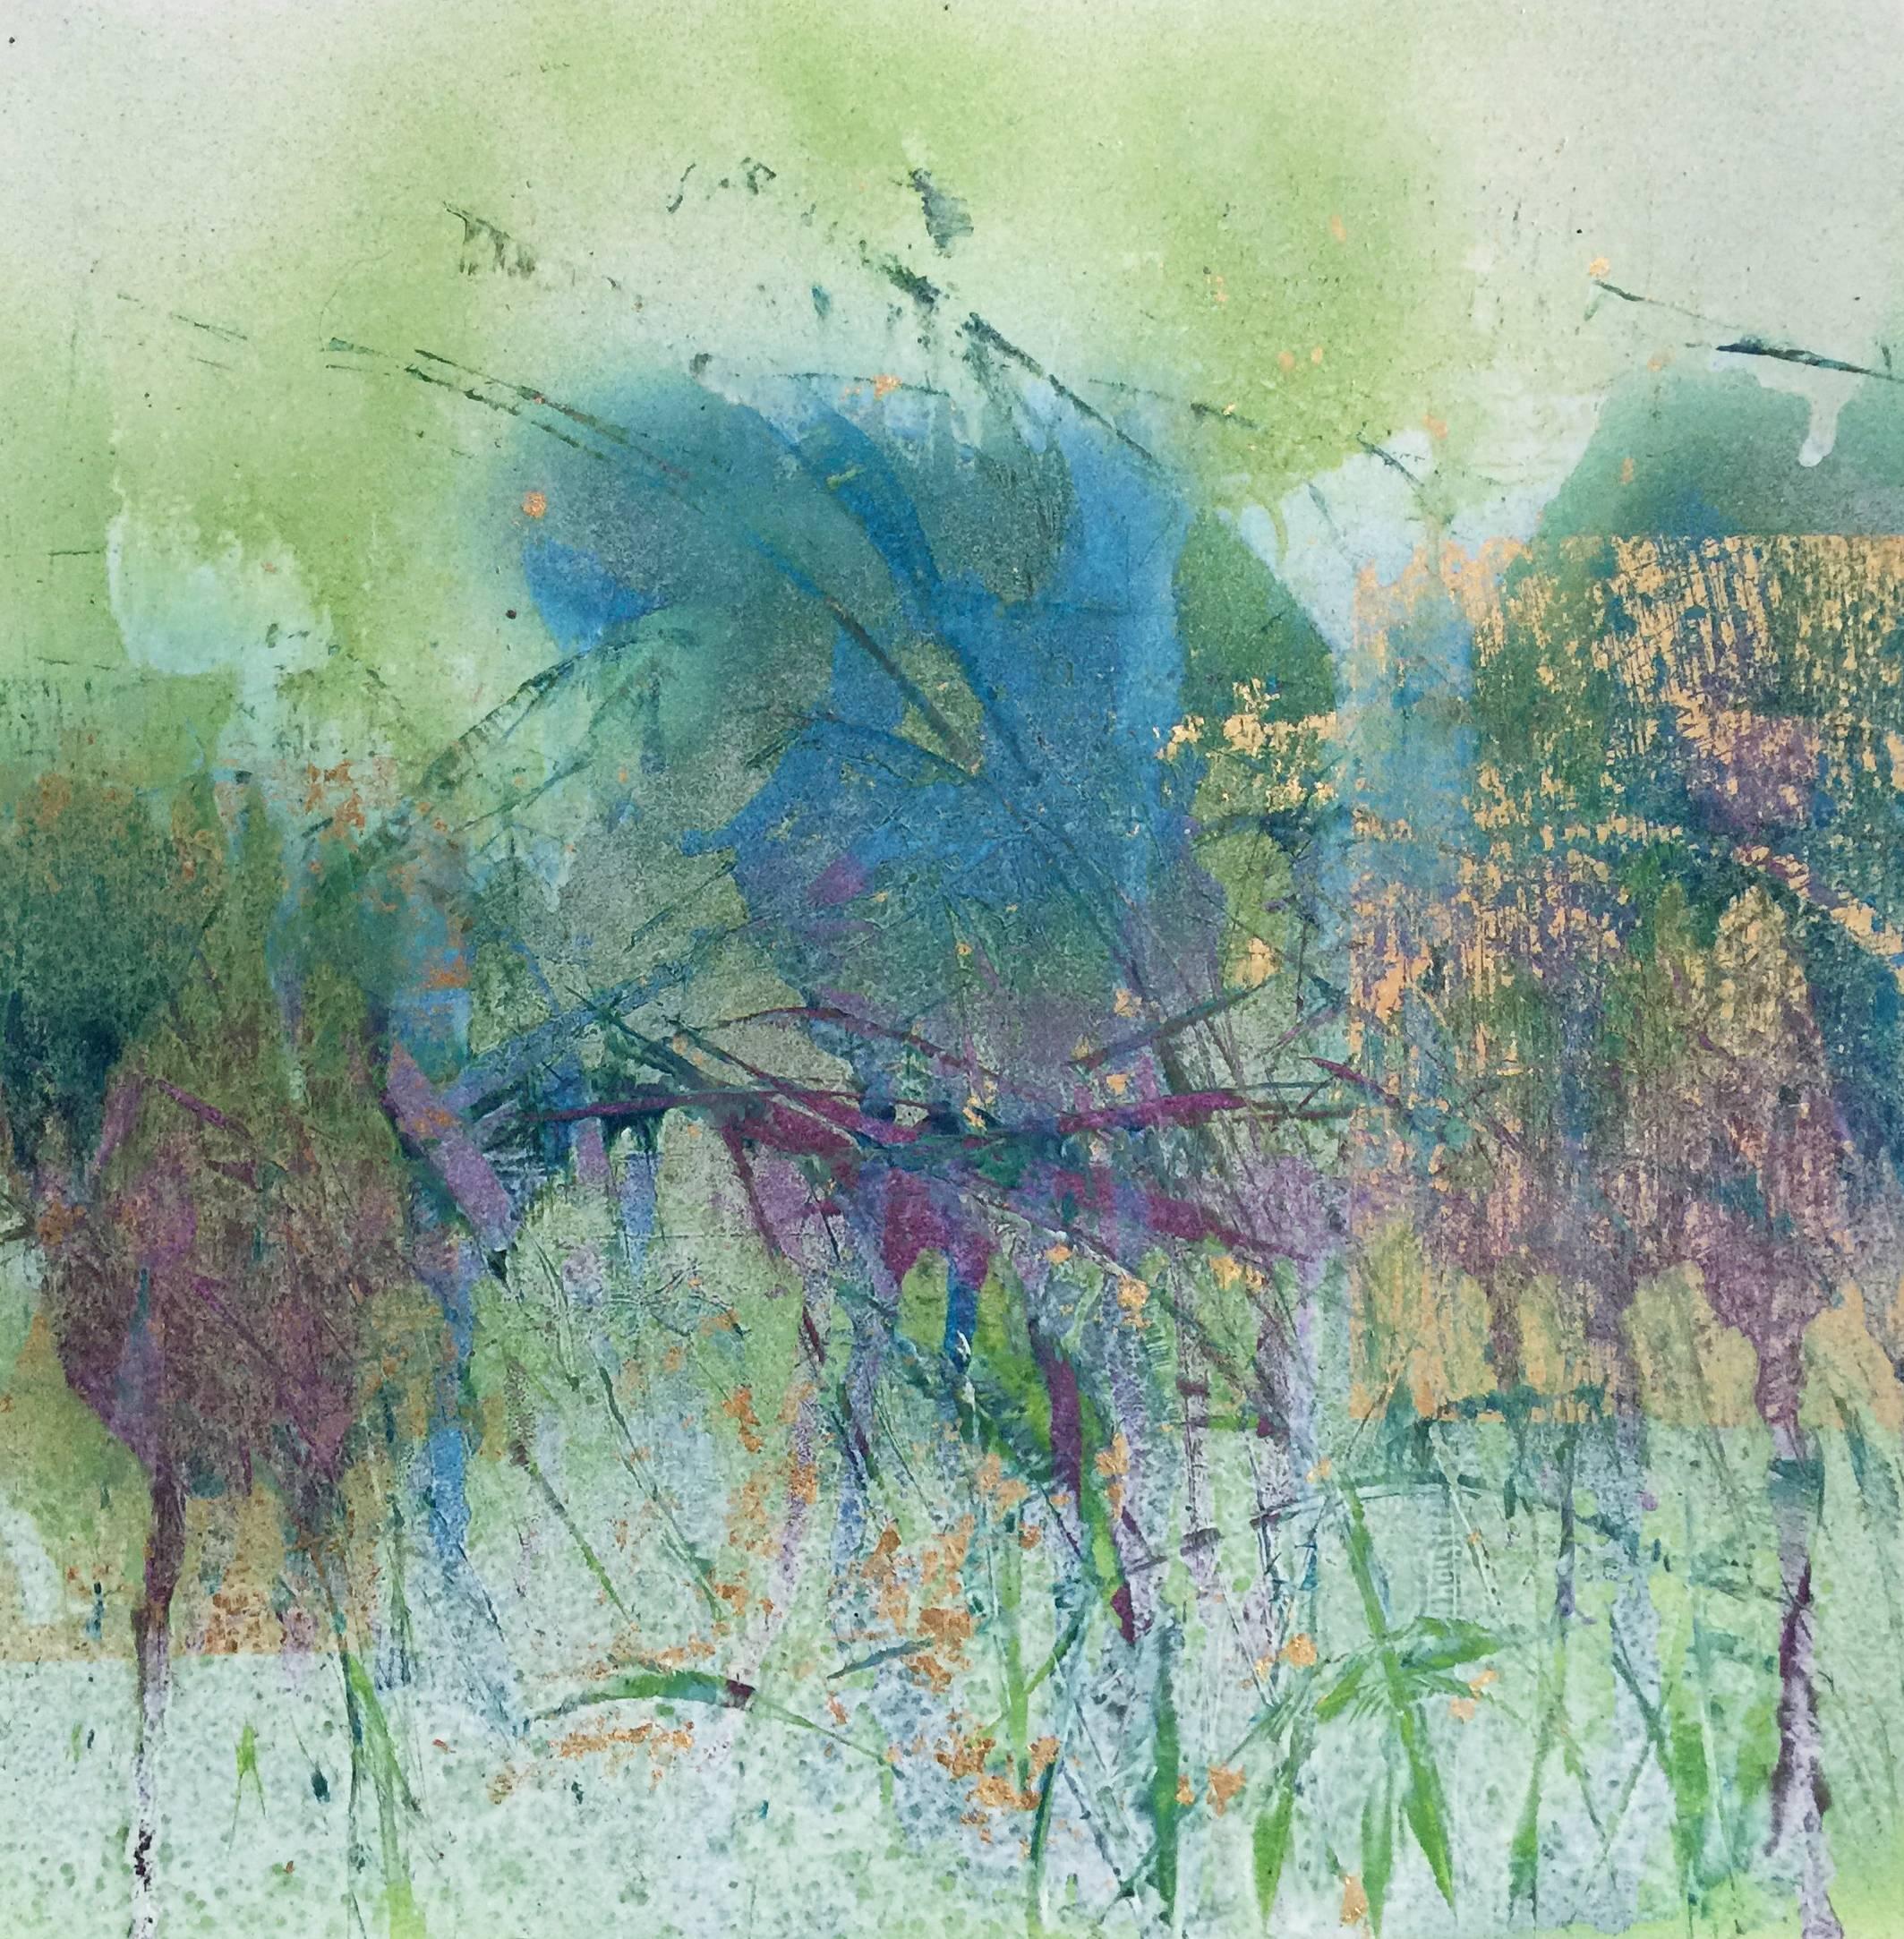 Pondering Evolution (Abstract Landscape with Pale Green, Teal, Purple & Gold) - Painting by Bruce Murphy